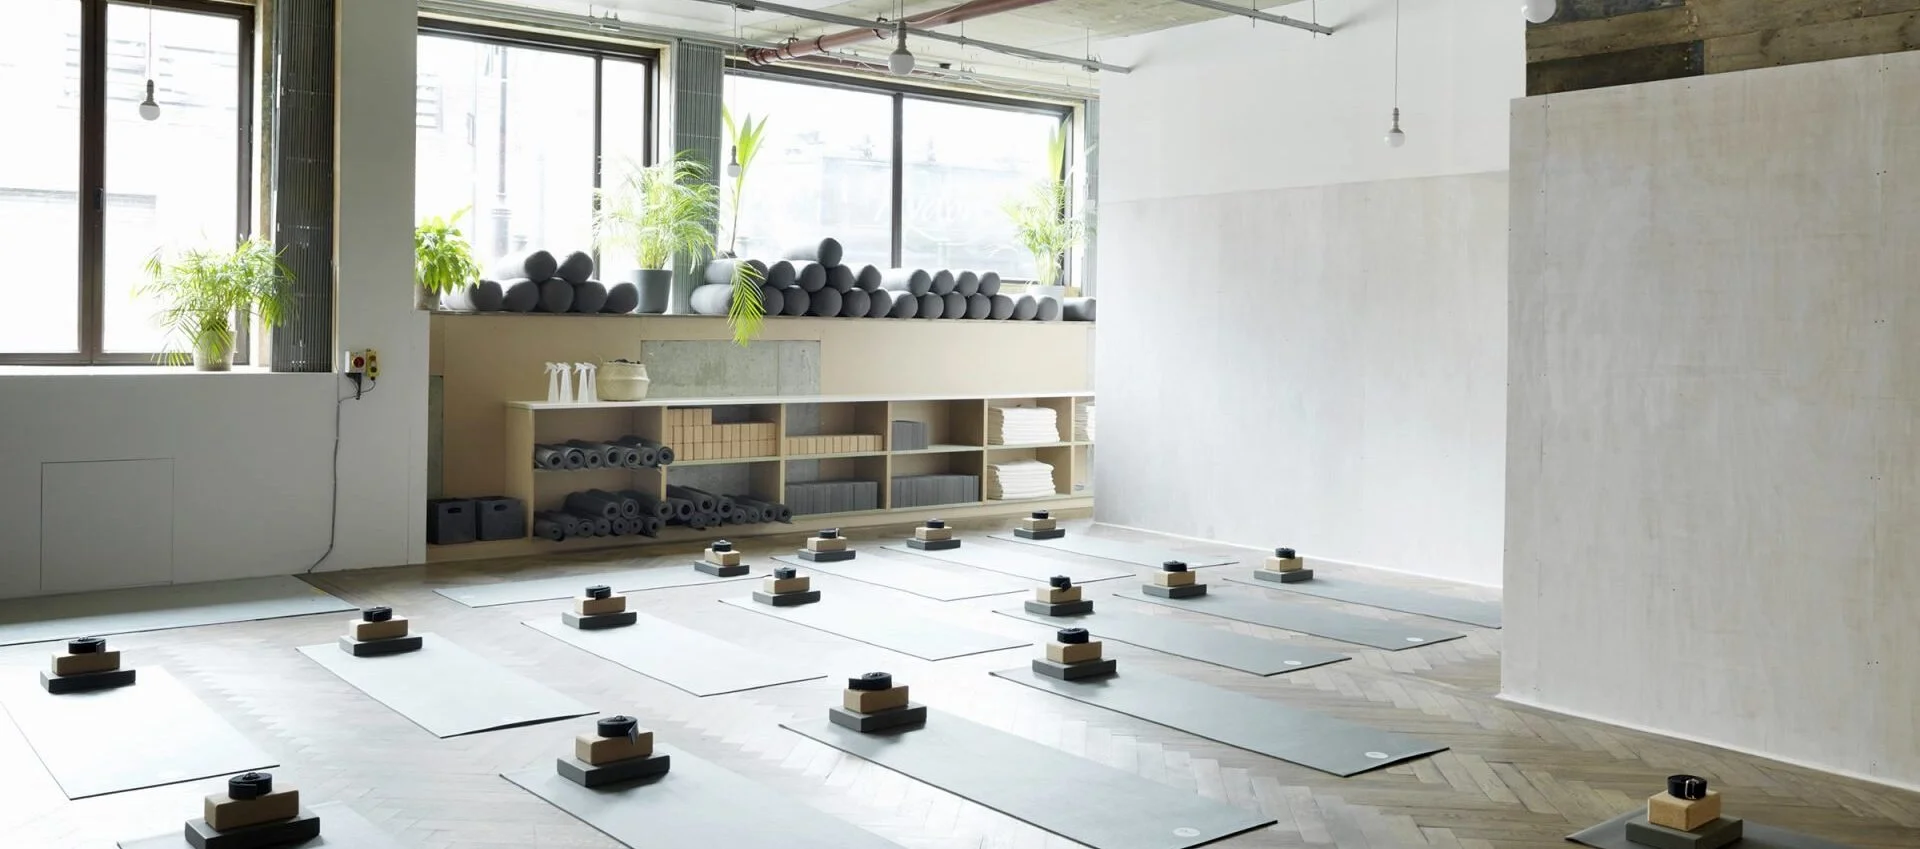 The Best Yoga Classes In London - The Nudge London